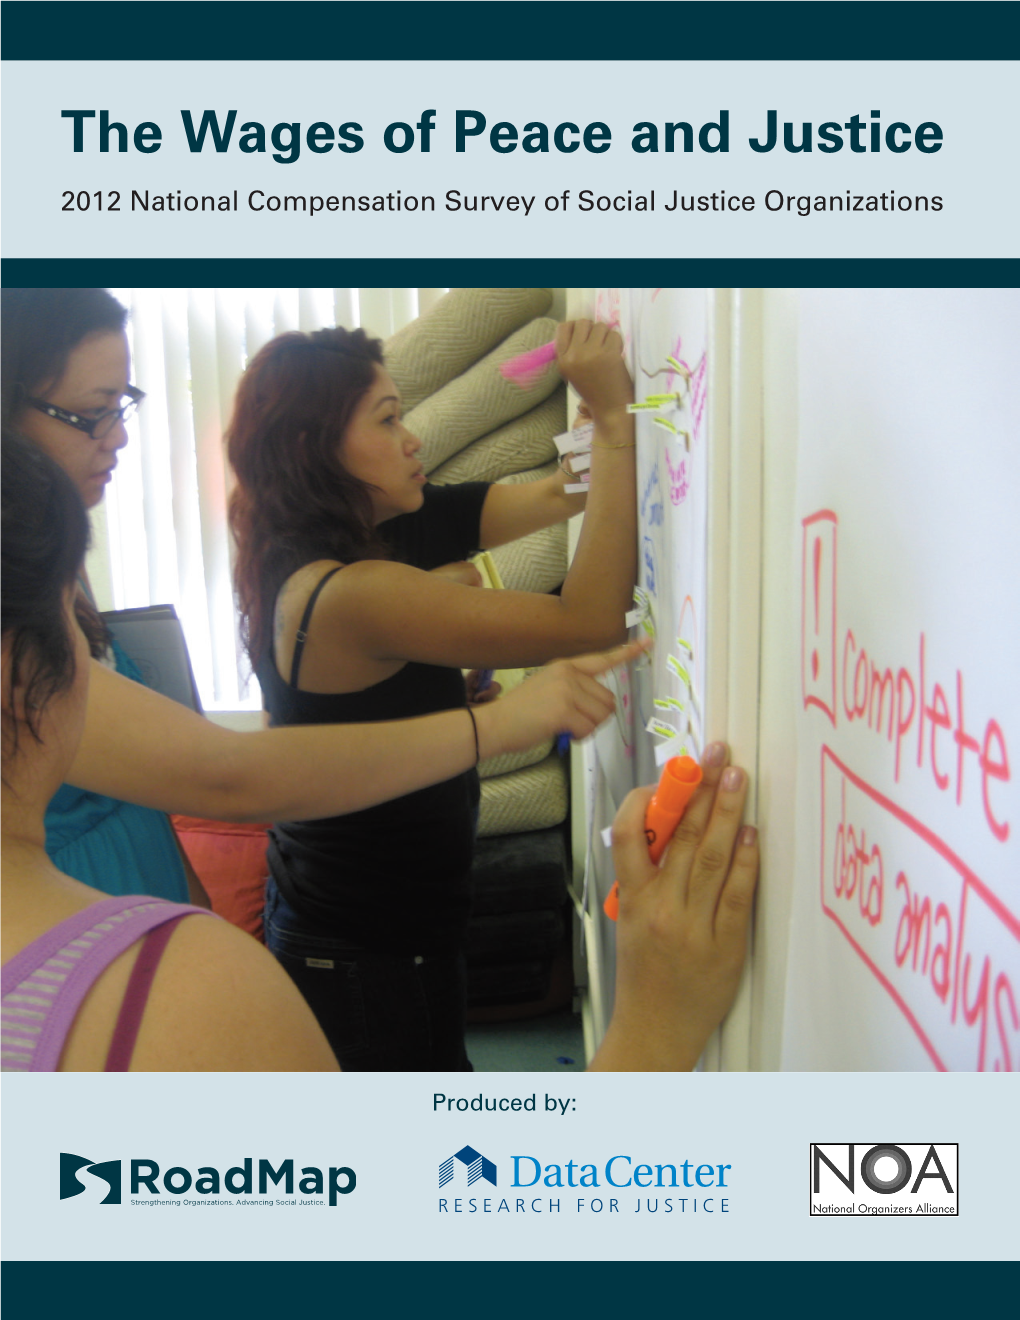 The Wages of Peace and Justice 2012 National Compensation Survey of Social Justice Organizations